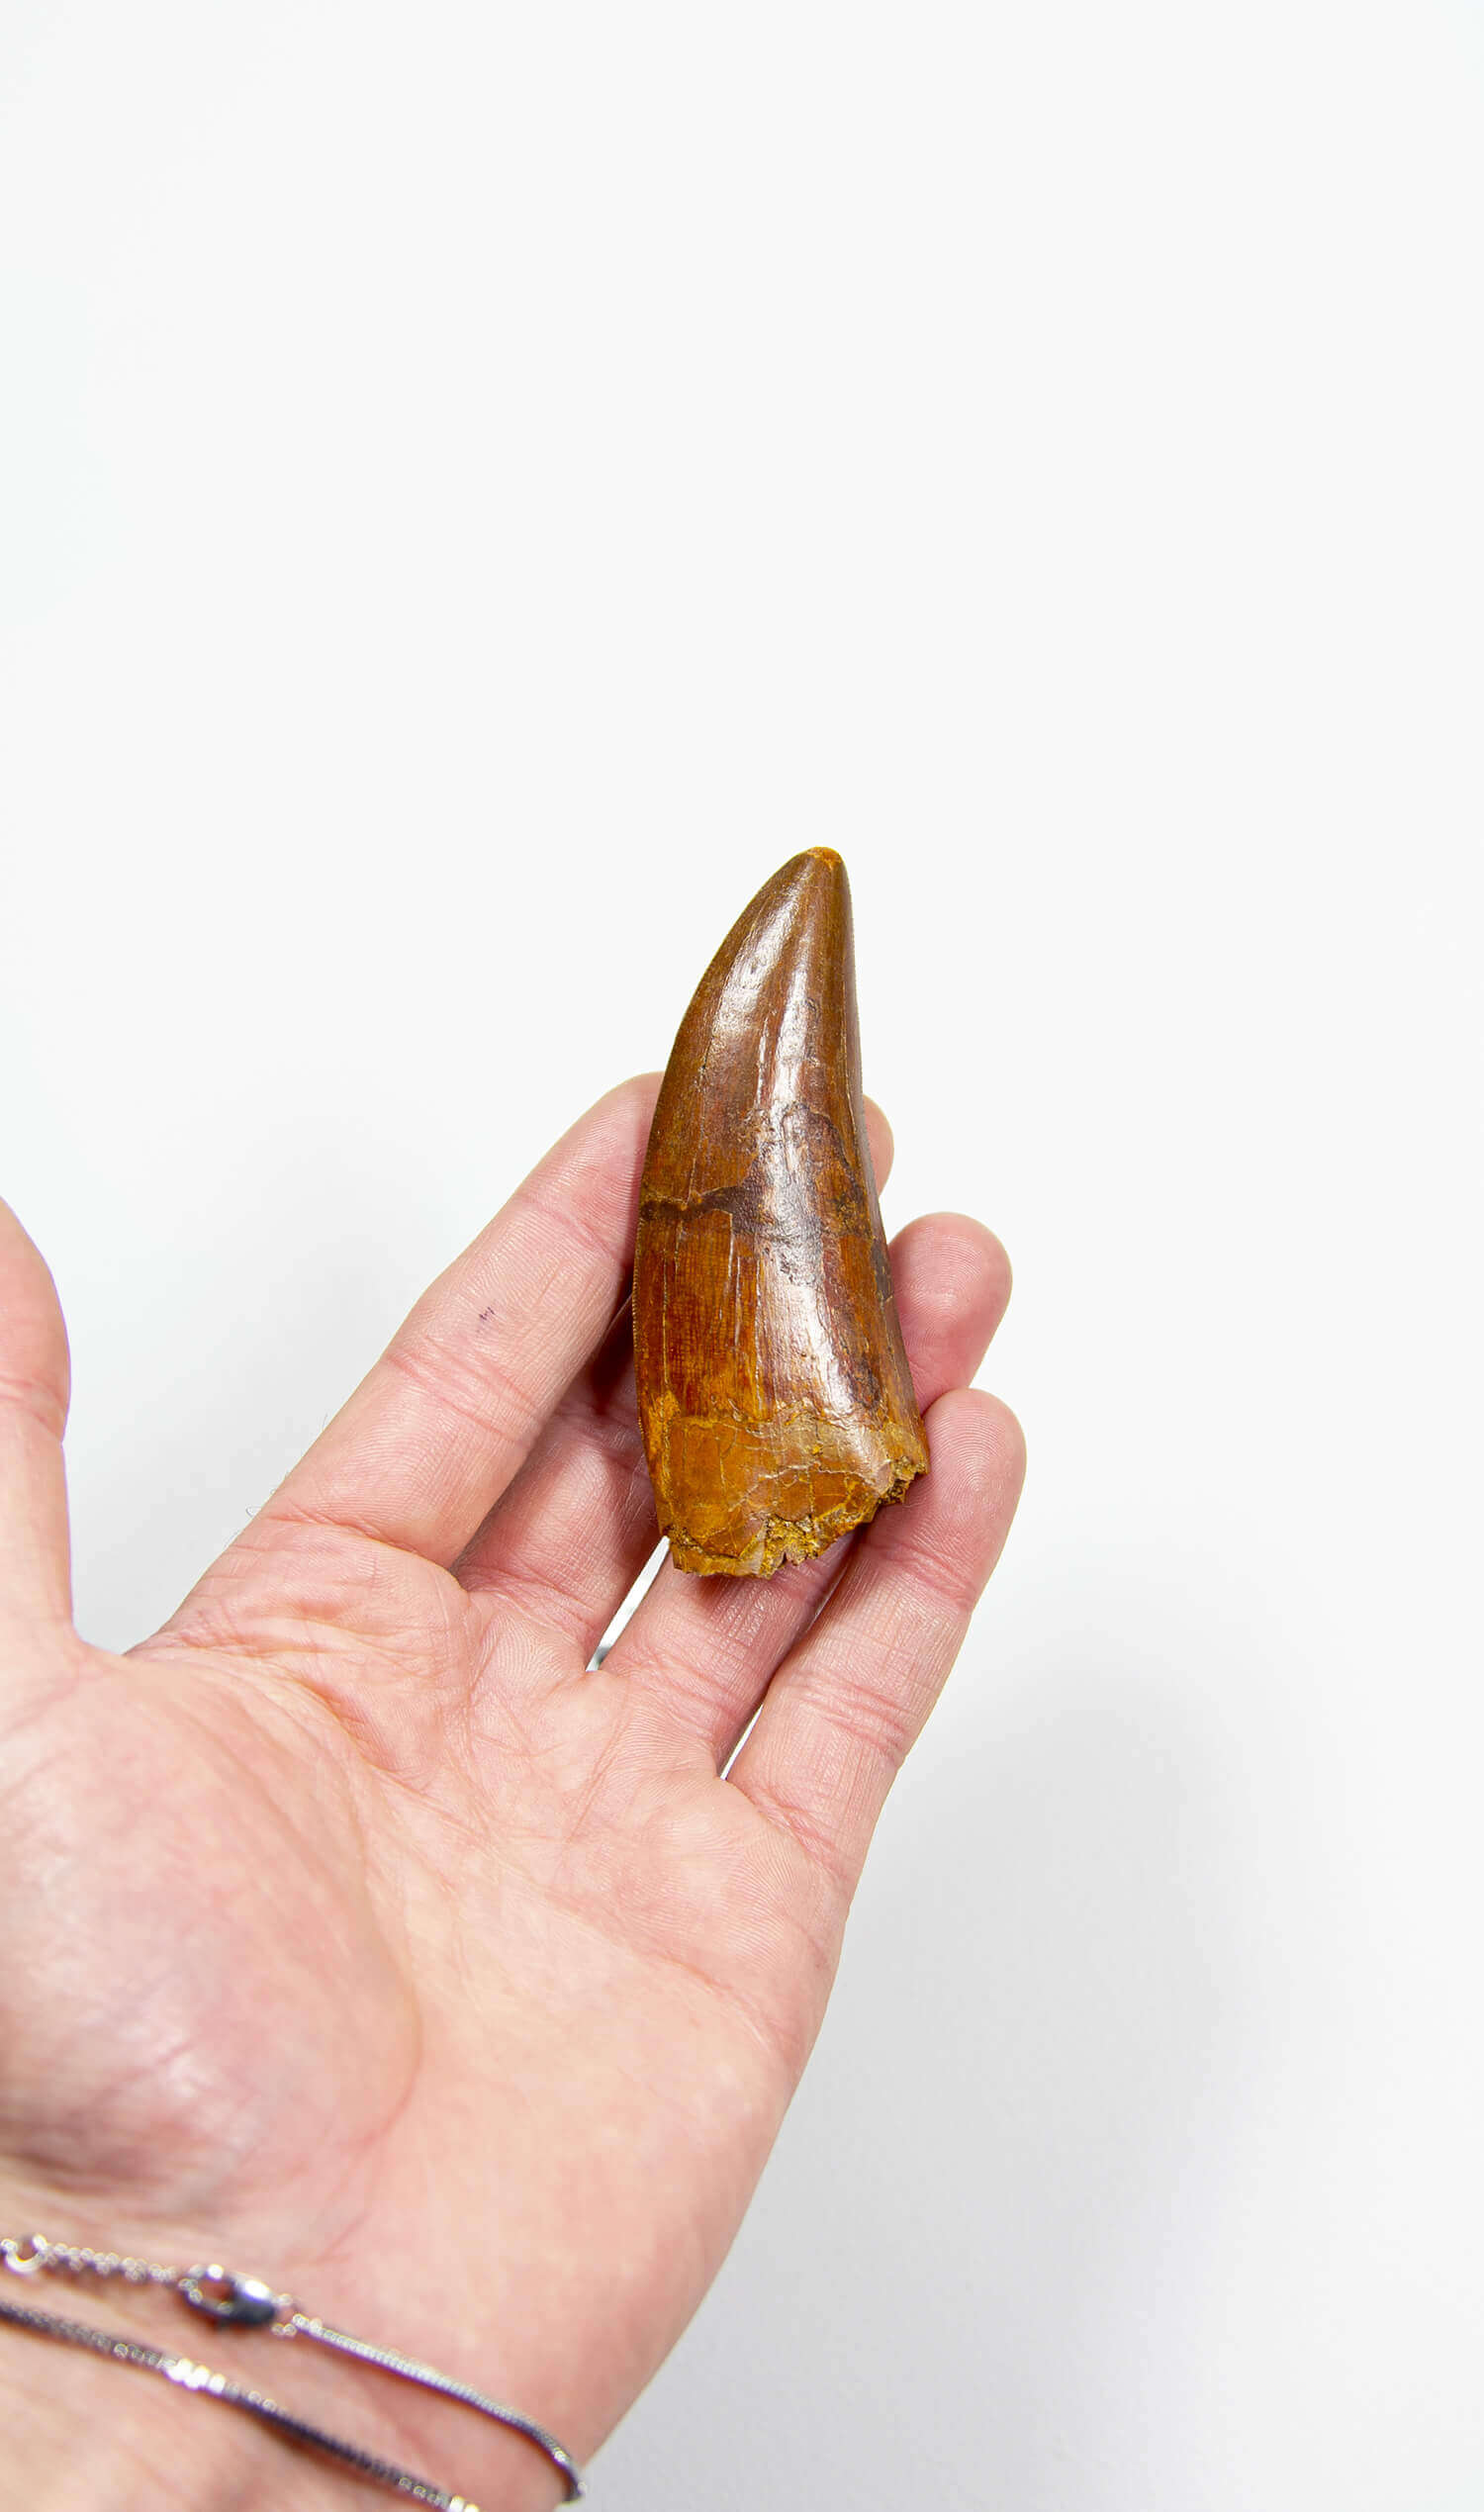 real fossil dinosaur carcharodontosaurus tooth for sale at the uk fossil store 50